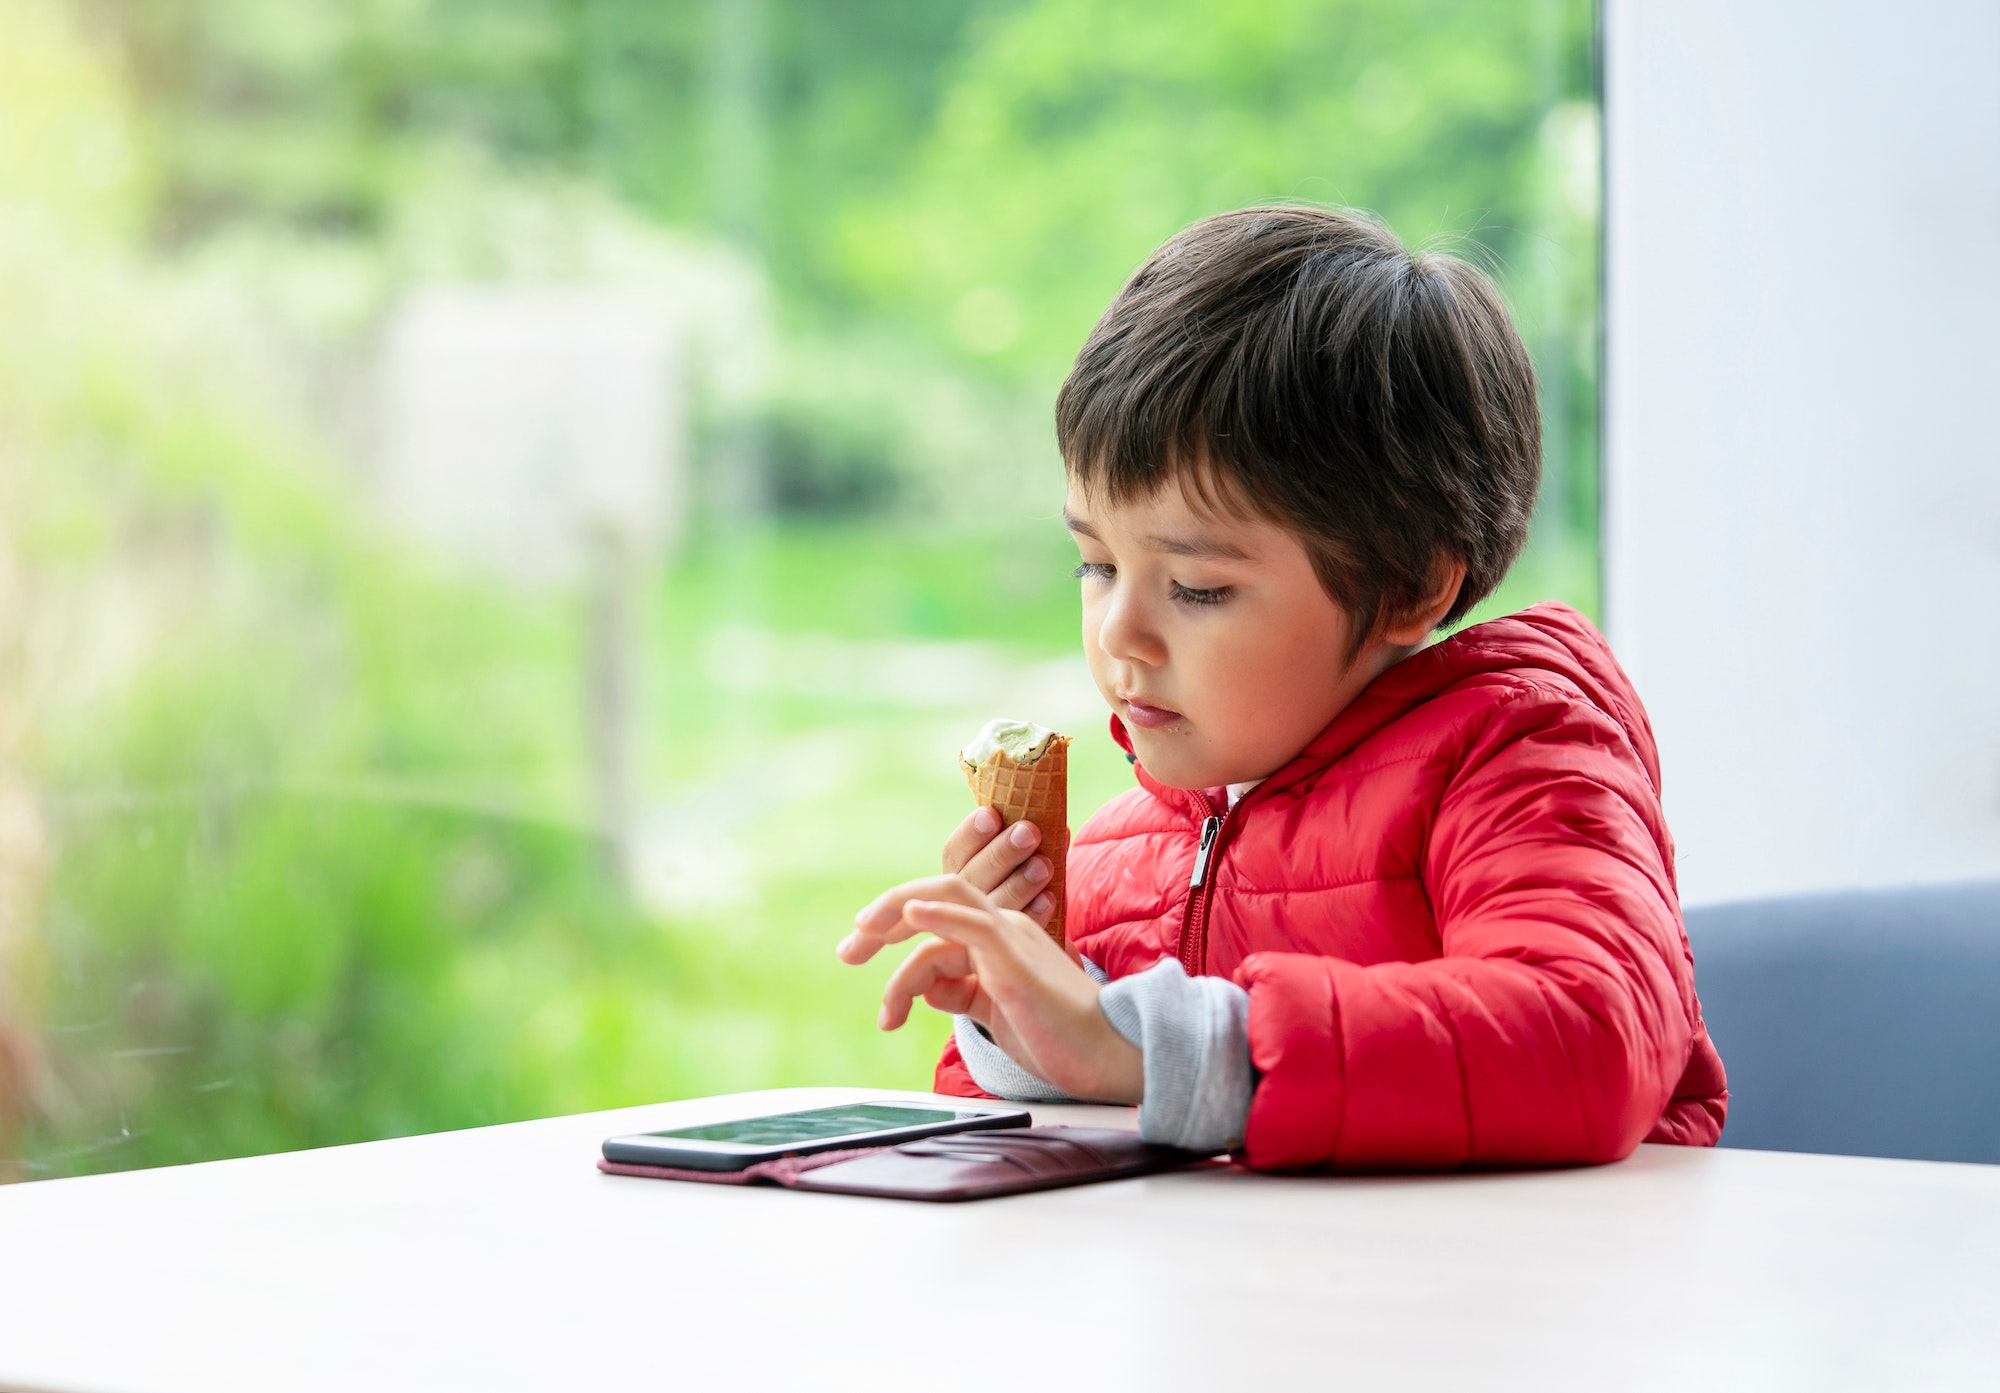 Kid eating ice cream, young boy watching cartoon or playing game on Mobil phone